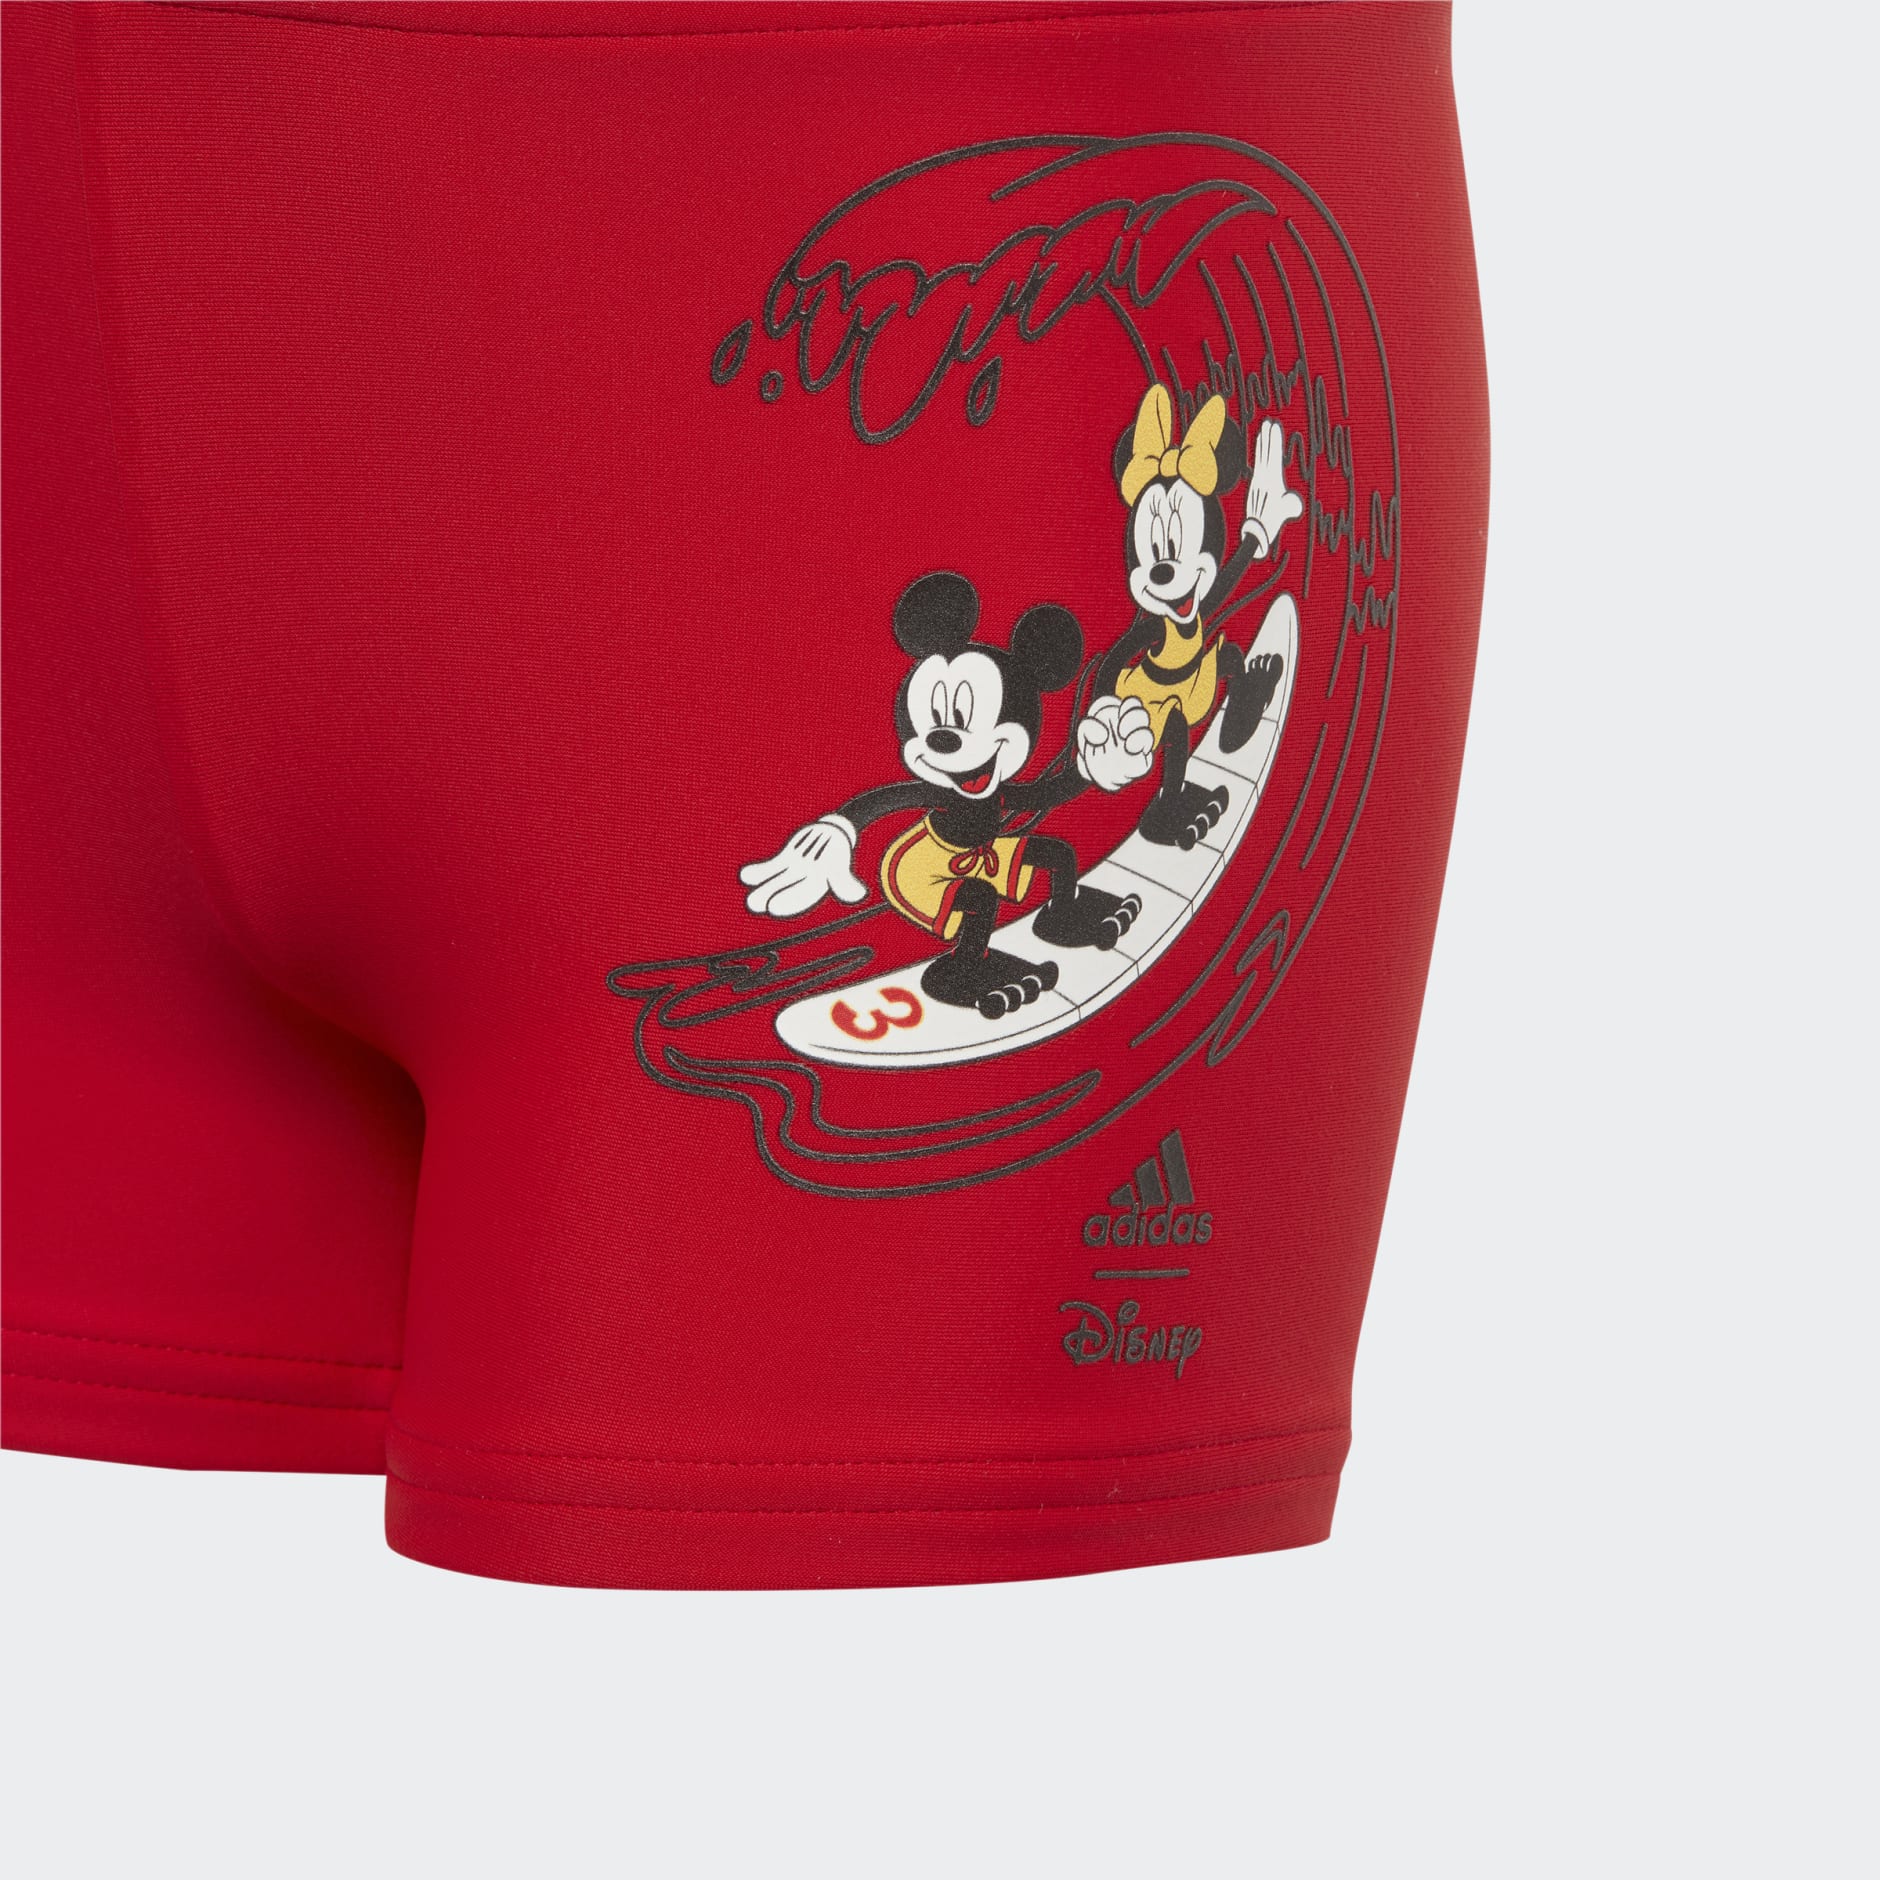 Underwear with Minnie Mouse print - Red